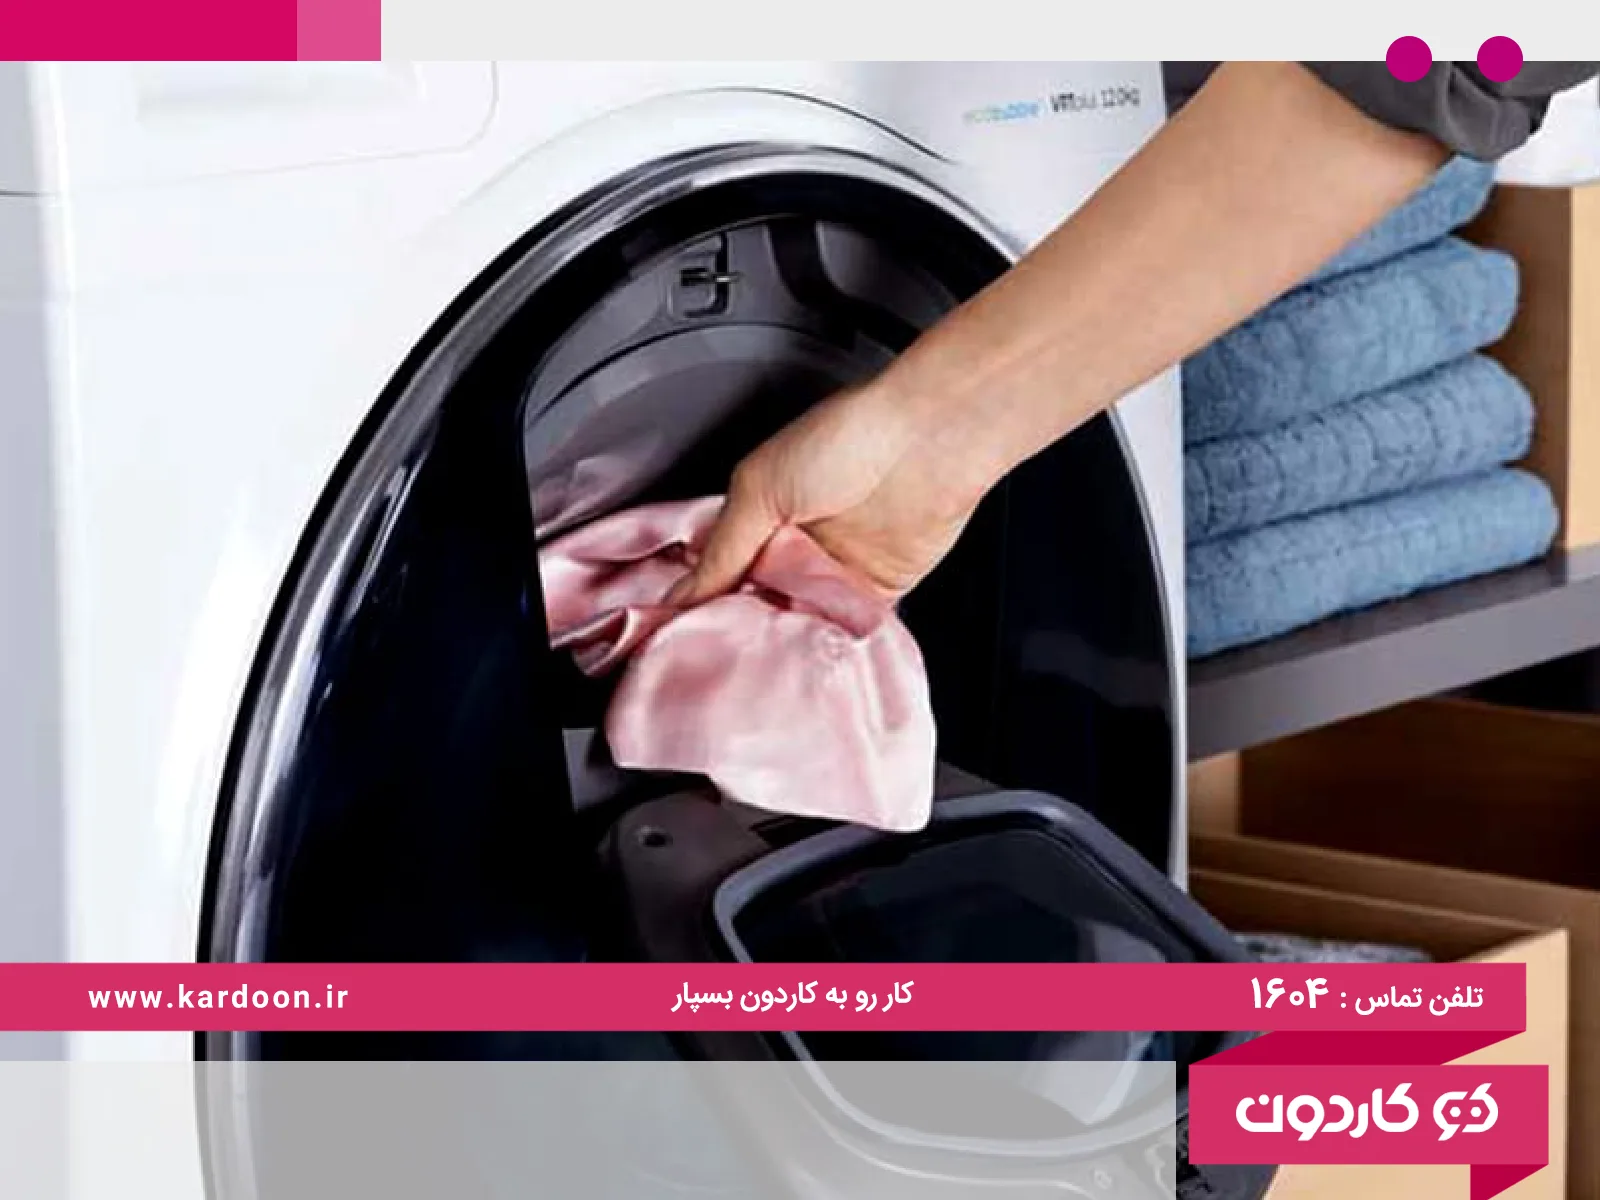 How to open the door of the LG washing machine